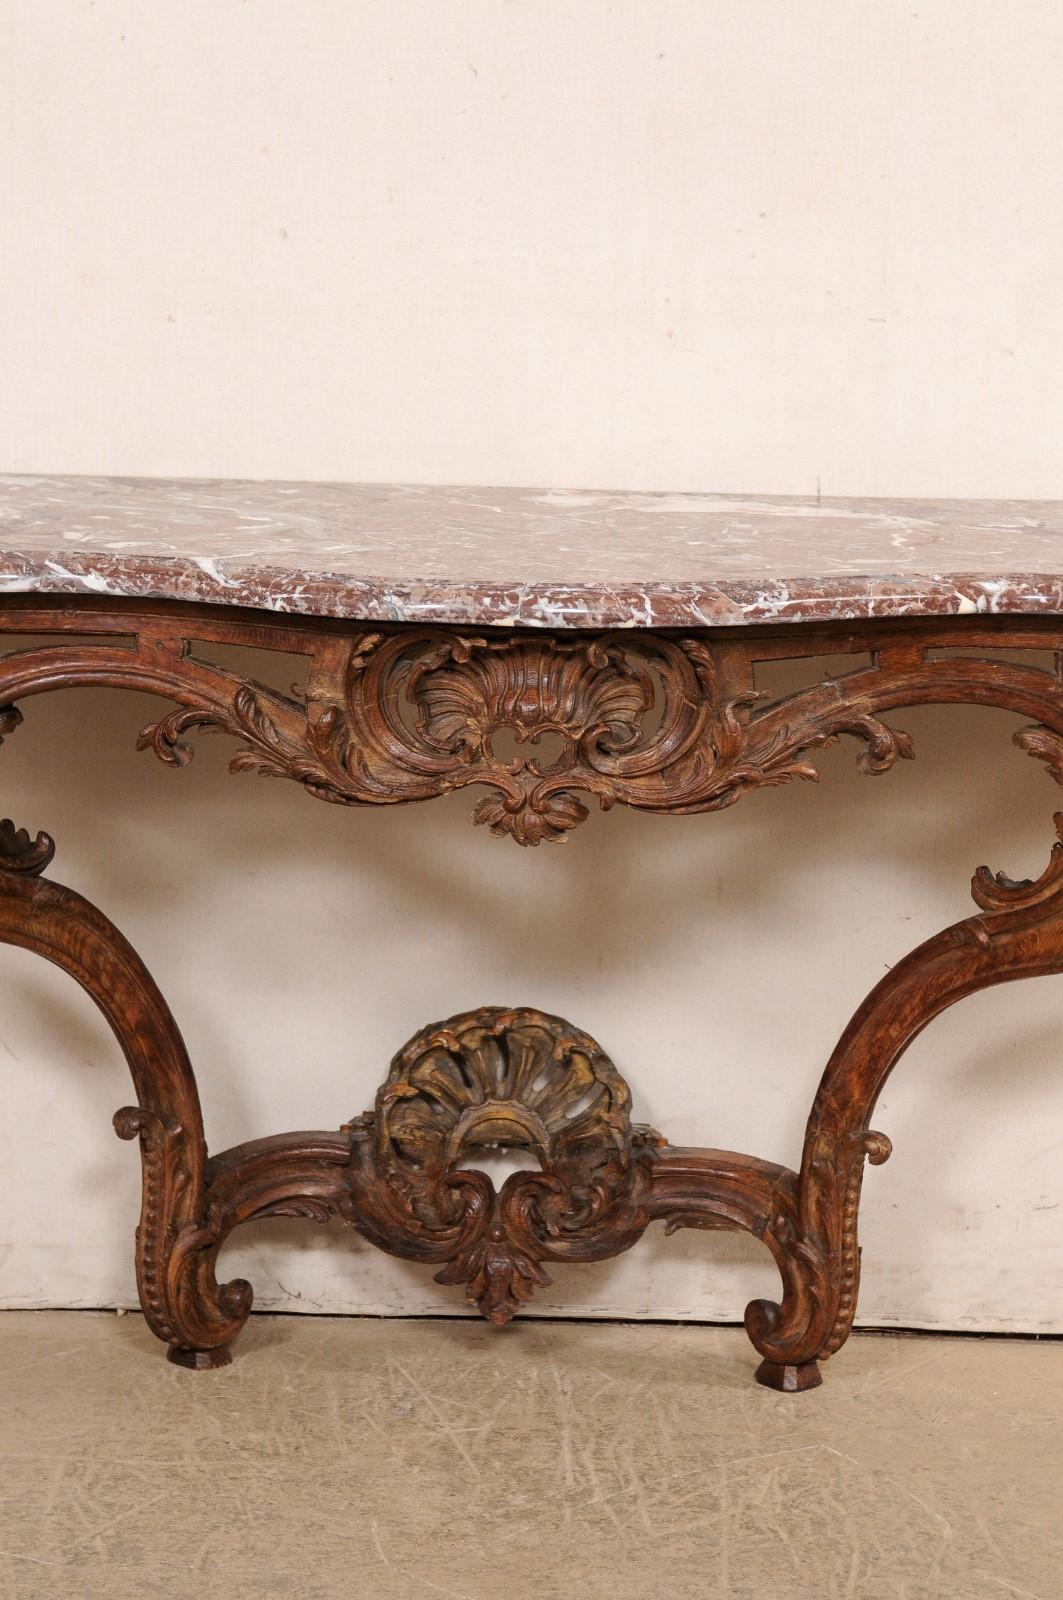 18th Century An Exquisite 18th C. French Rococo Serpentine Wall Console w/Marble Top For Sale